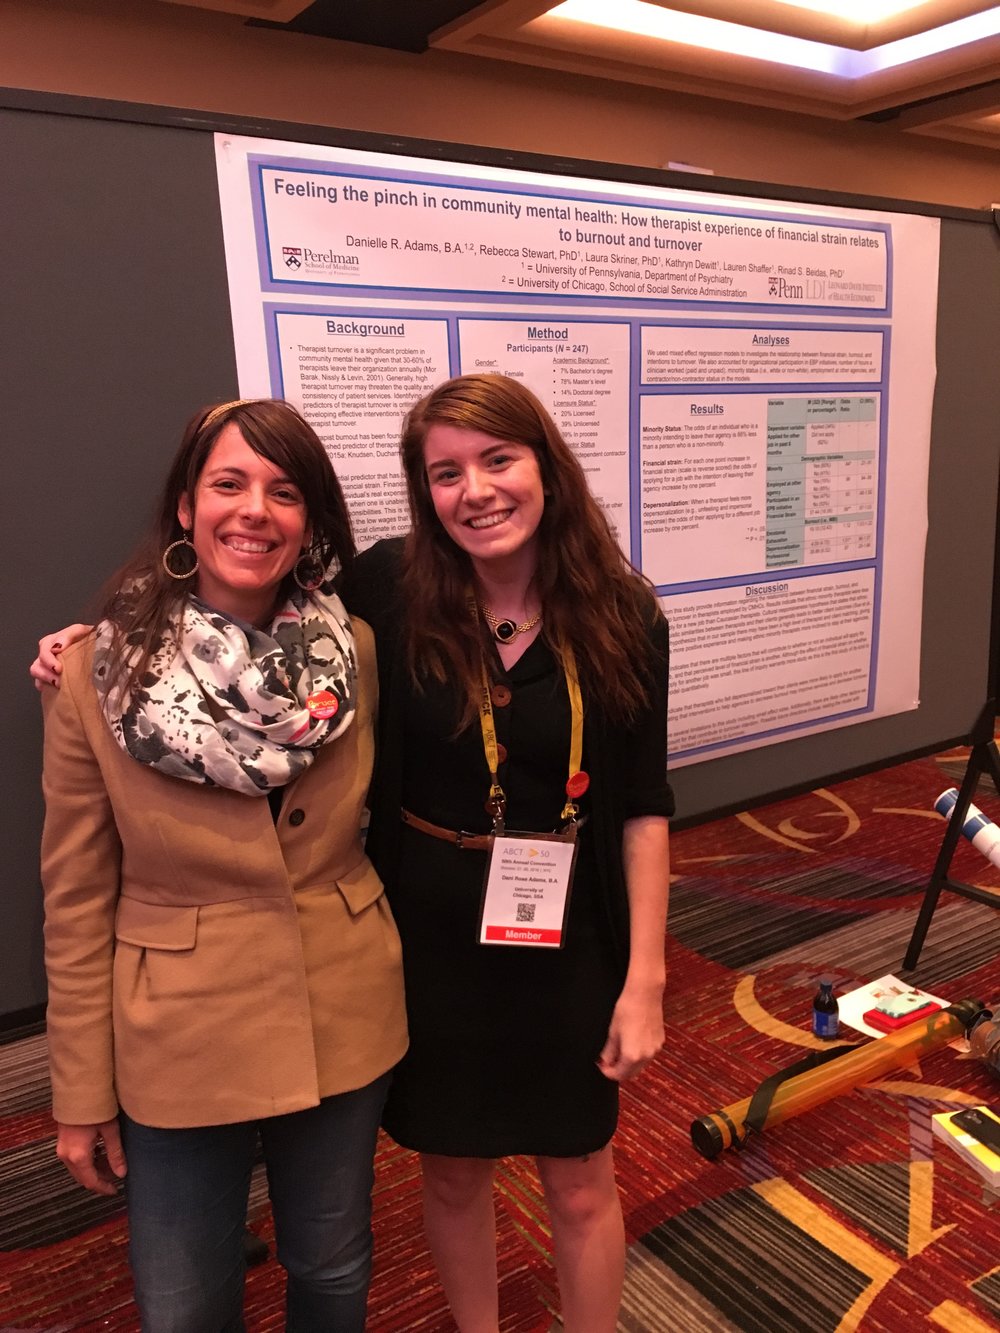 Dani Adams, a former research coordinator in Dr. Beidas’ lab, presenting a poster at ABCT on how therapist experience of financial strain relates to burnout and turnover